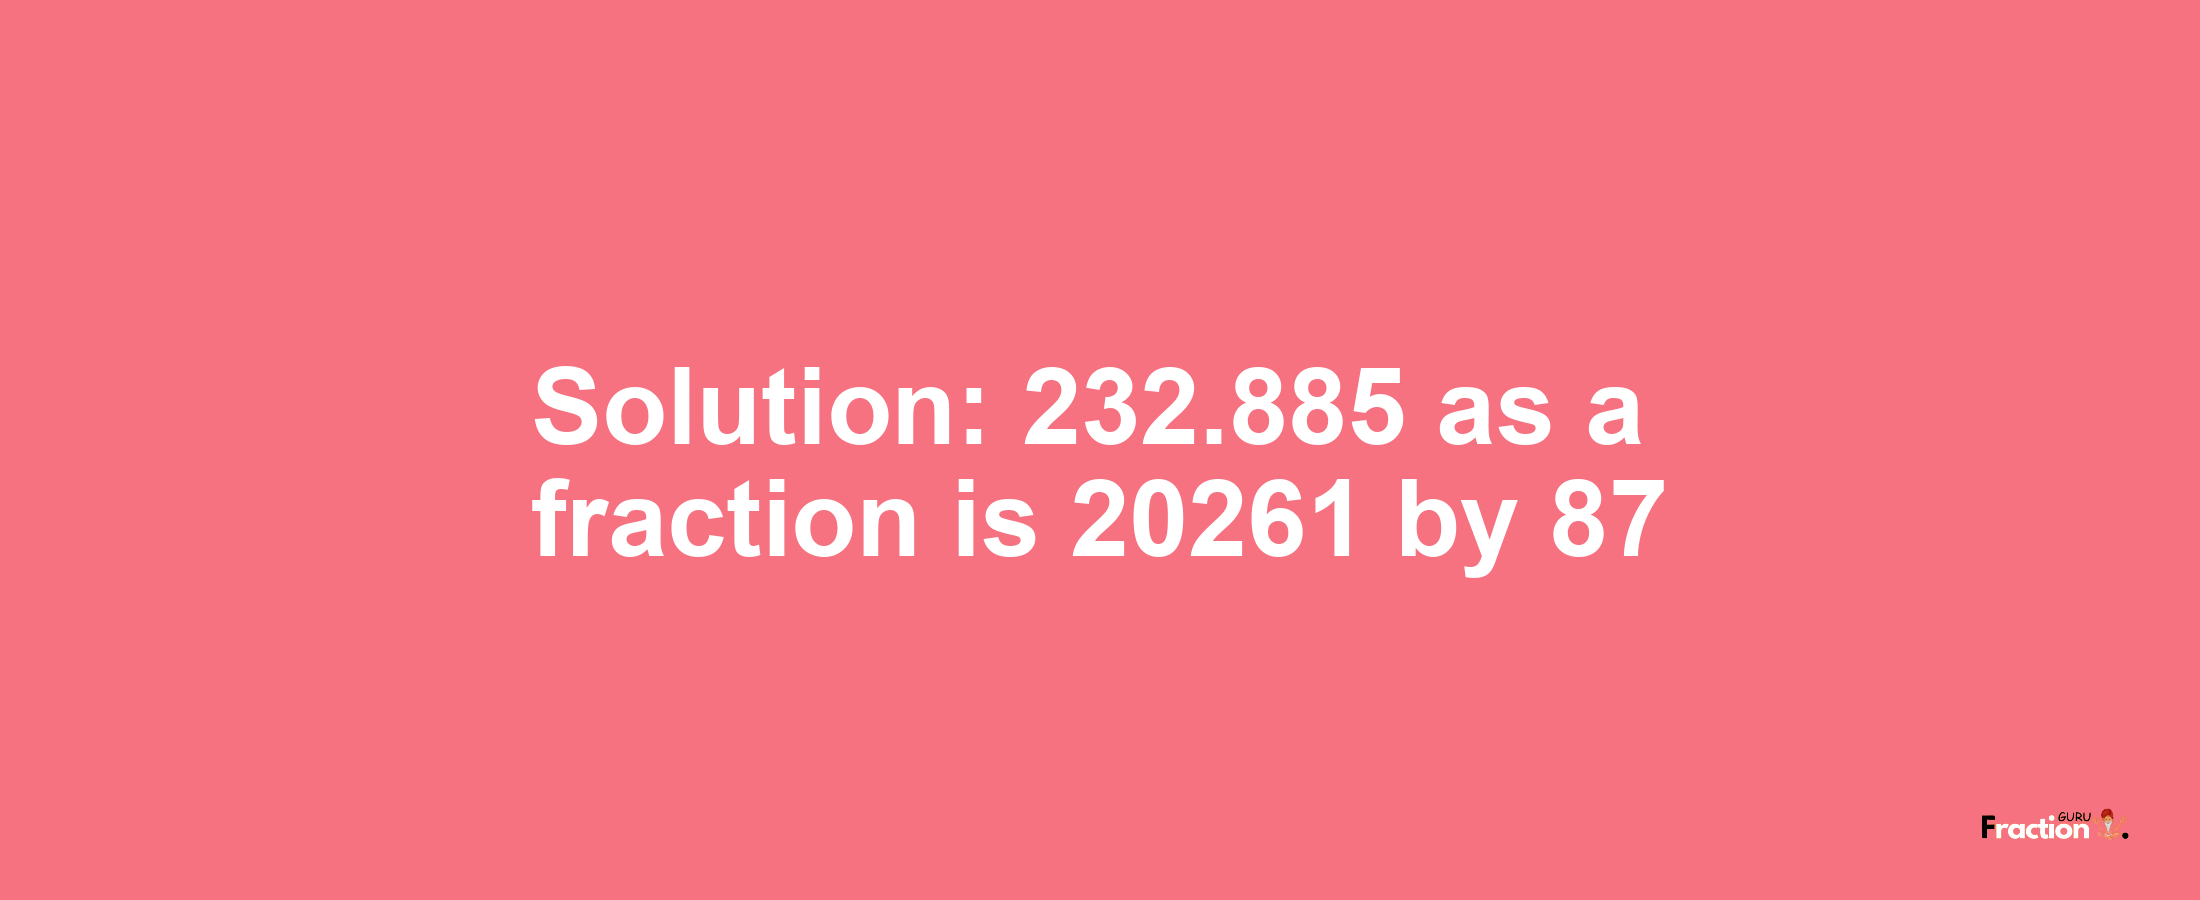 Solution:232.885 as a fraction is 20261/87